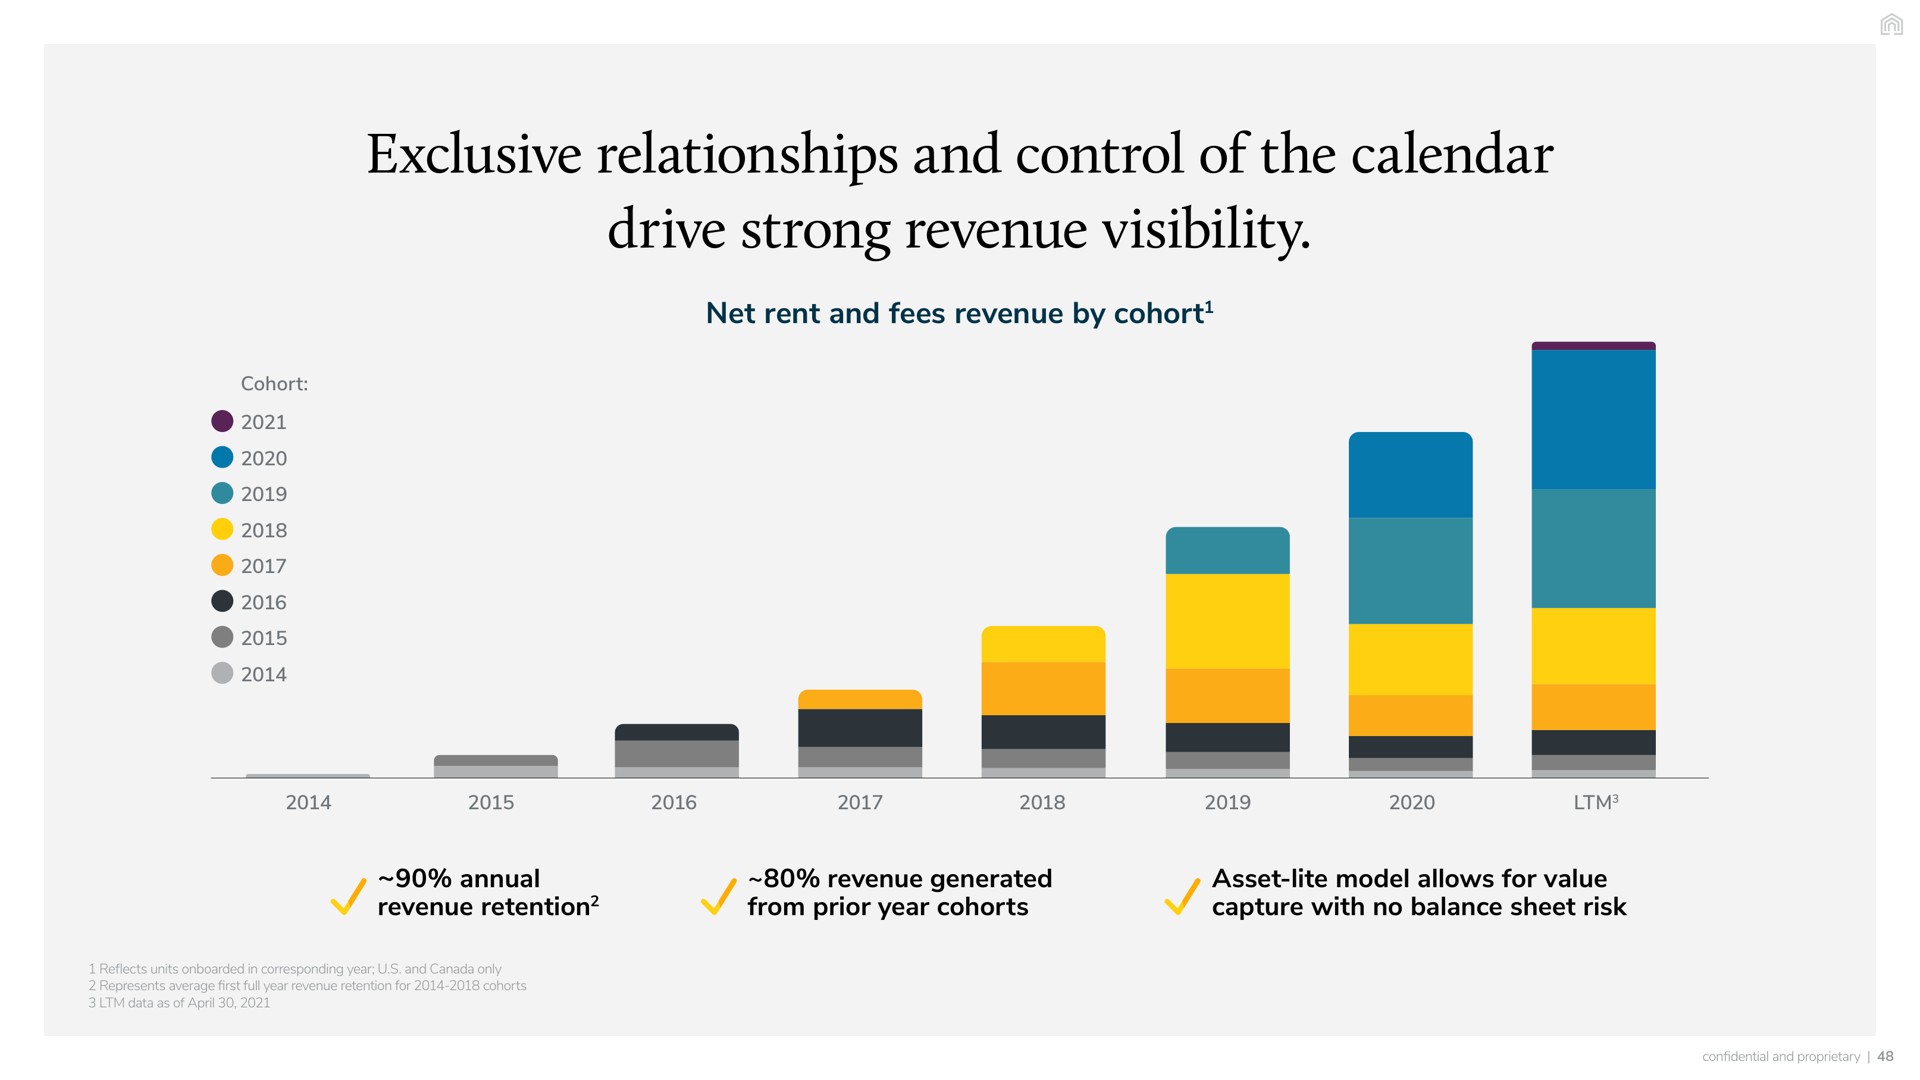 exclusive relationships and control of the calendar drive strong revenue visibility net rent fees by cohort cohort annual retention generated from prior year cohorts asset lite model allows for value capture with no balance sheet risk year for cot | Vacasa